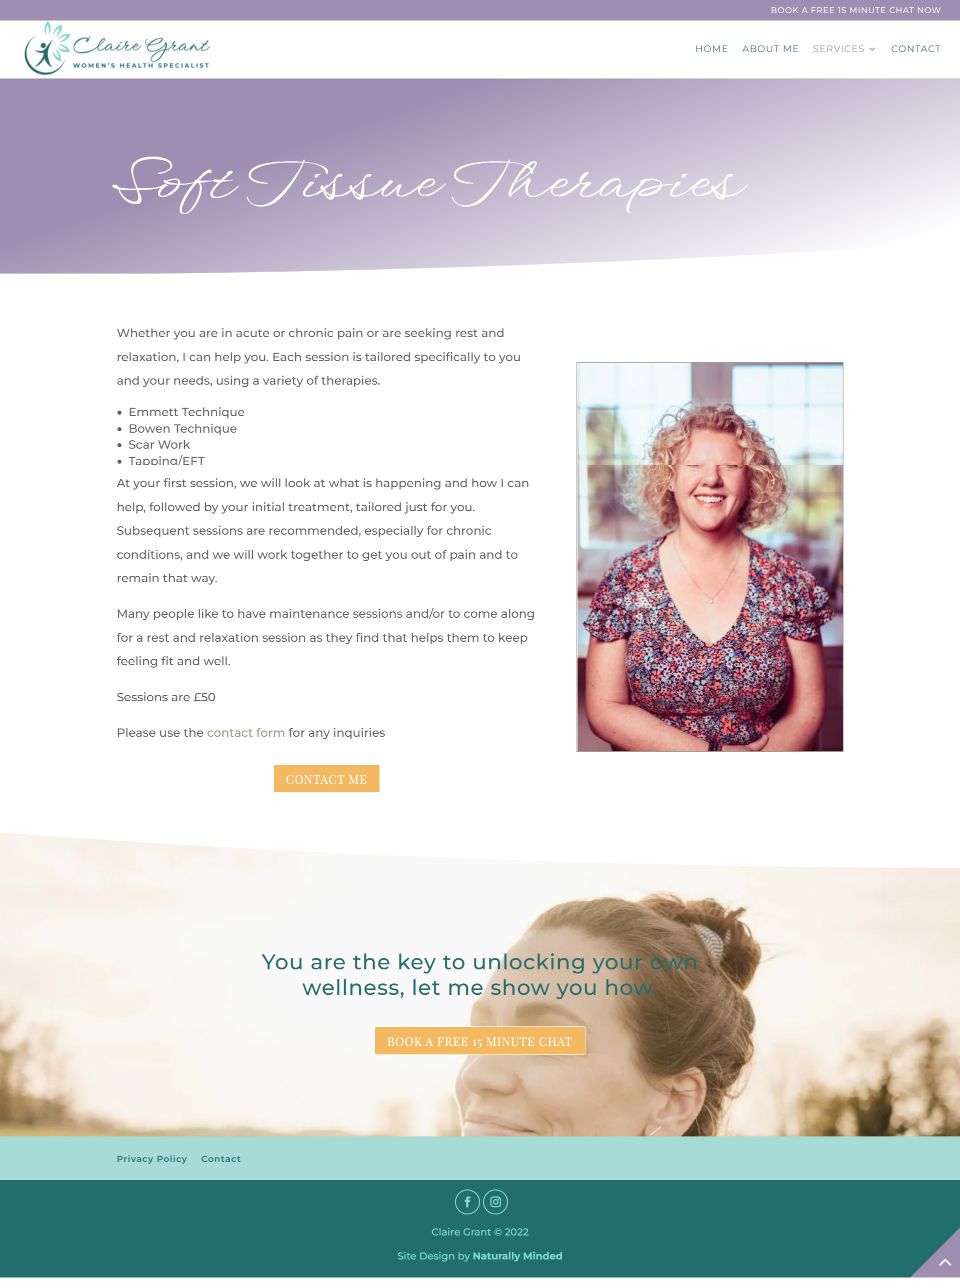 claire-grant-services-page-naturally-minded-illustration-sophie-taylor-website-design-wellness-business-online